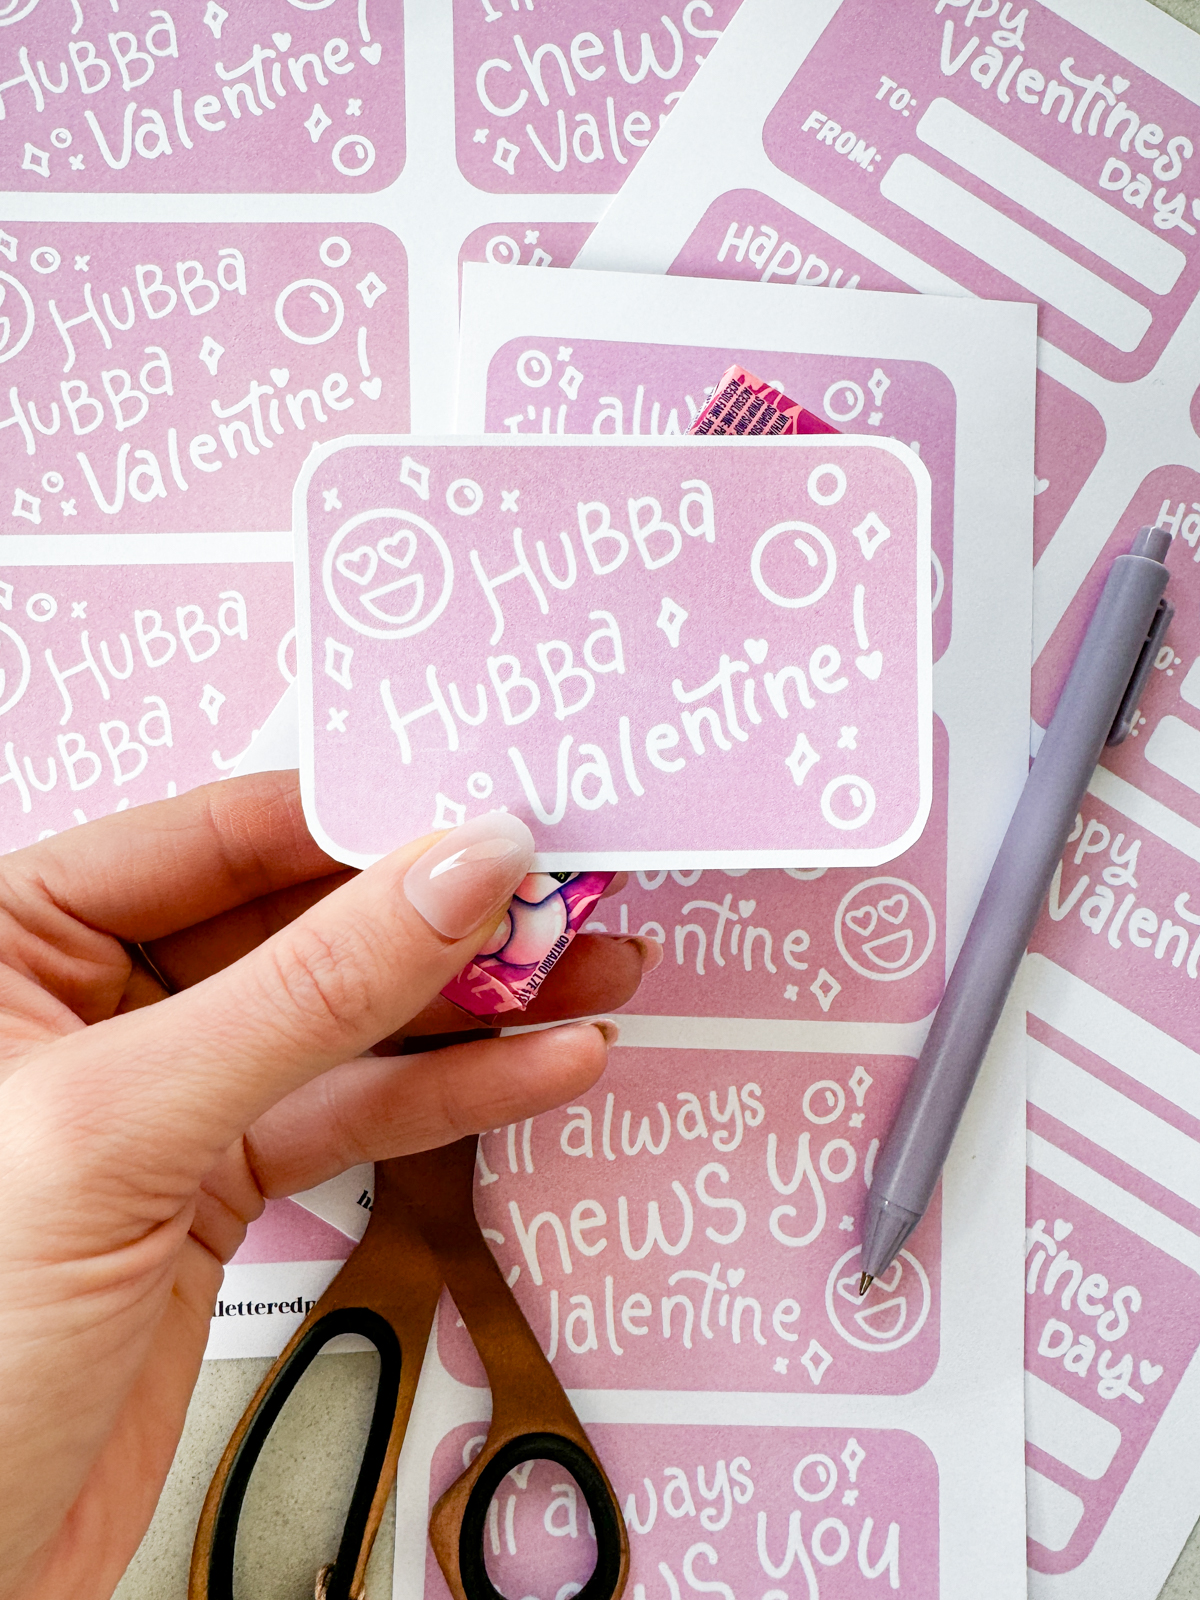 hubba hubba valentine cut with rounded corners and held with a pack of bubble gum free printables being cut to size on the countertop